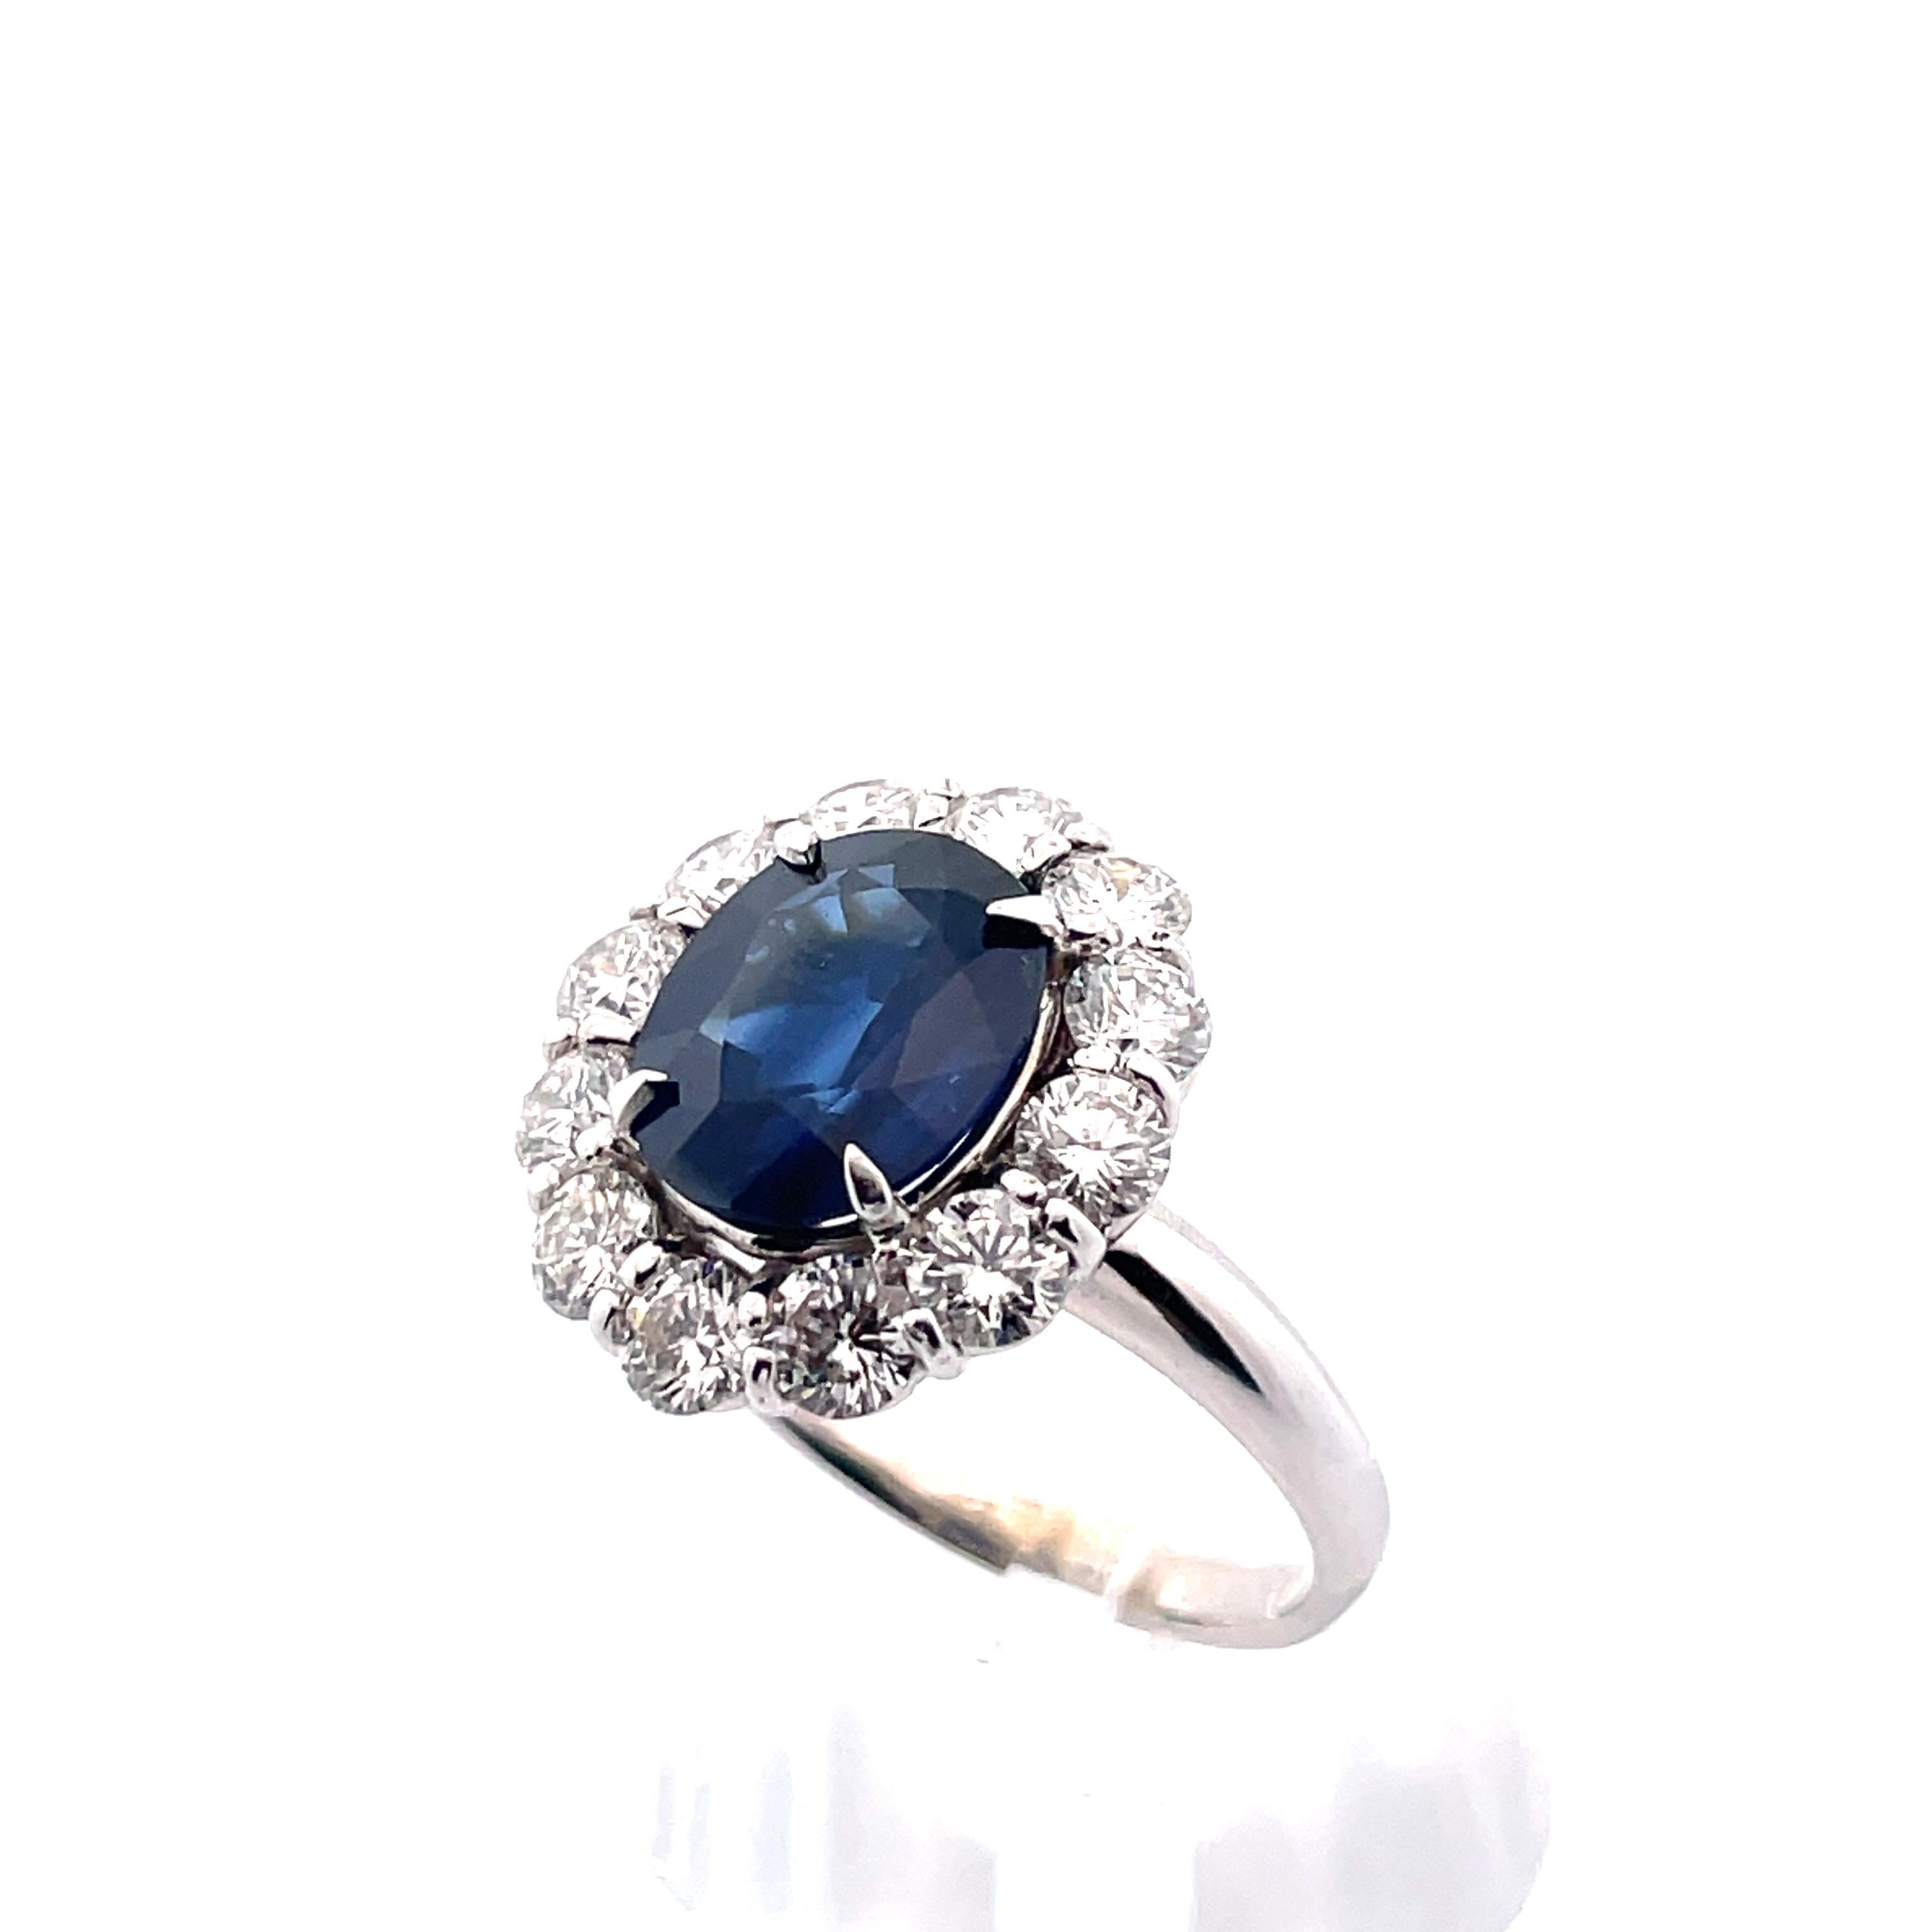  14K White Gold Contemporary Lady Di Ring Blue Sapphire and Diamond  For Sale 3